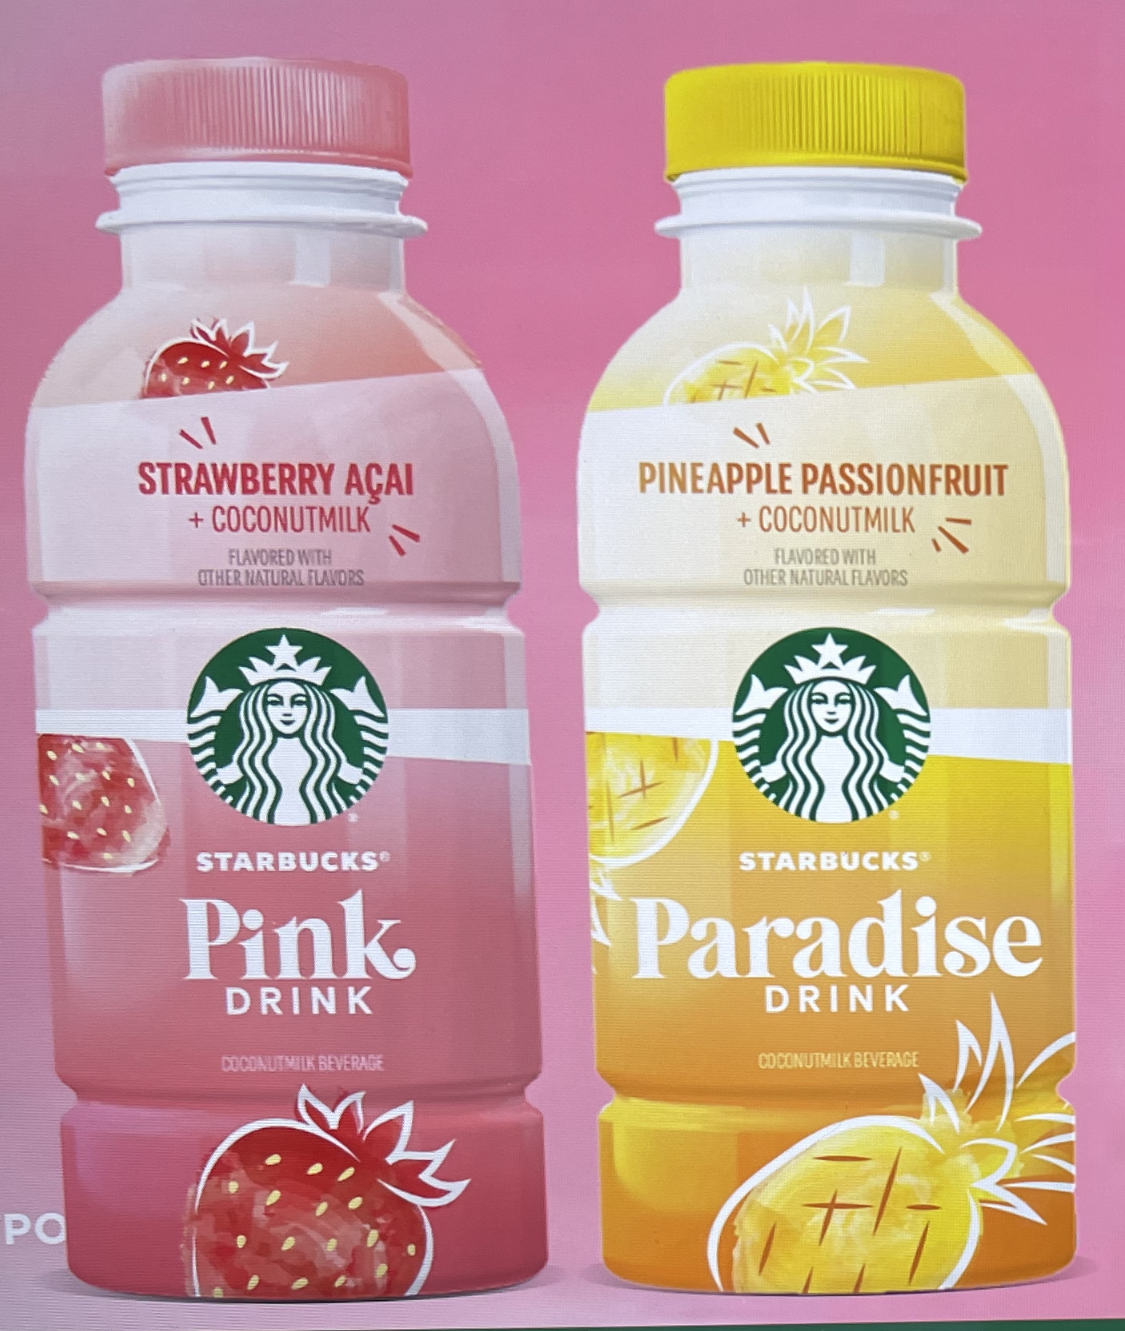 https://www.beverage-digest.com/ext/resources/Issue-2022-10-06/pink.png?t=1664738923&width=696